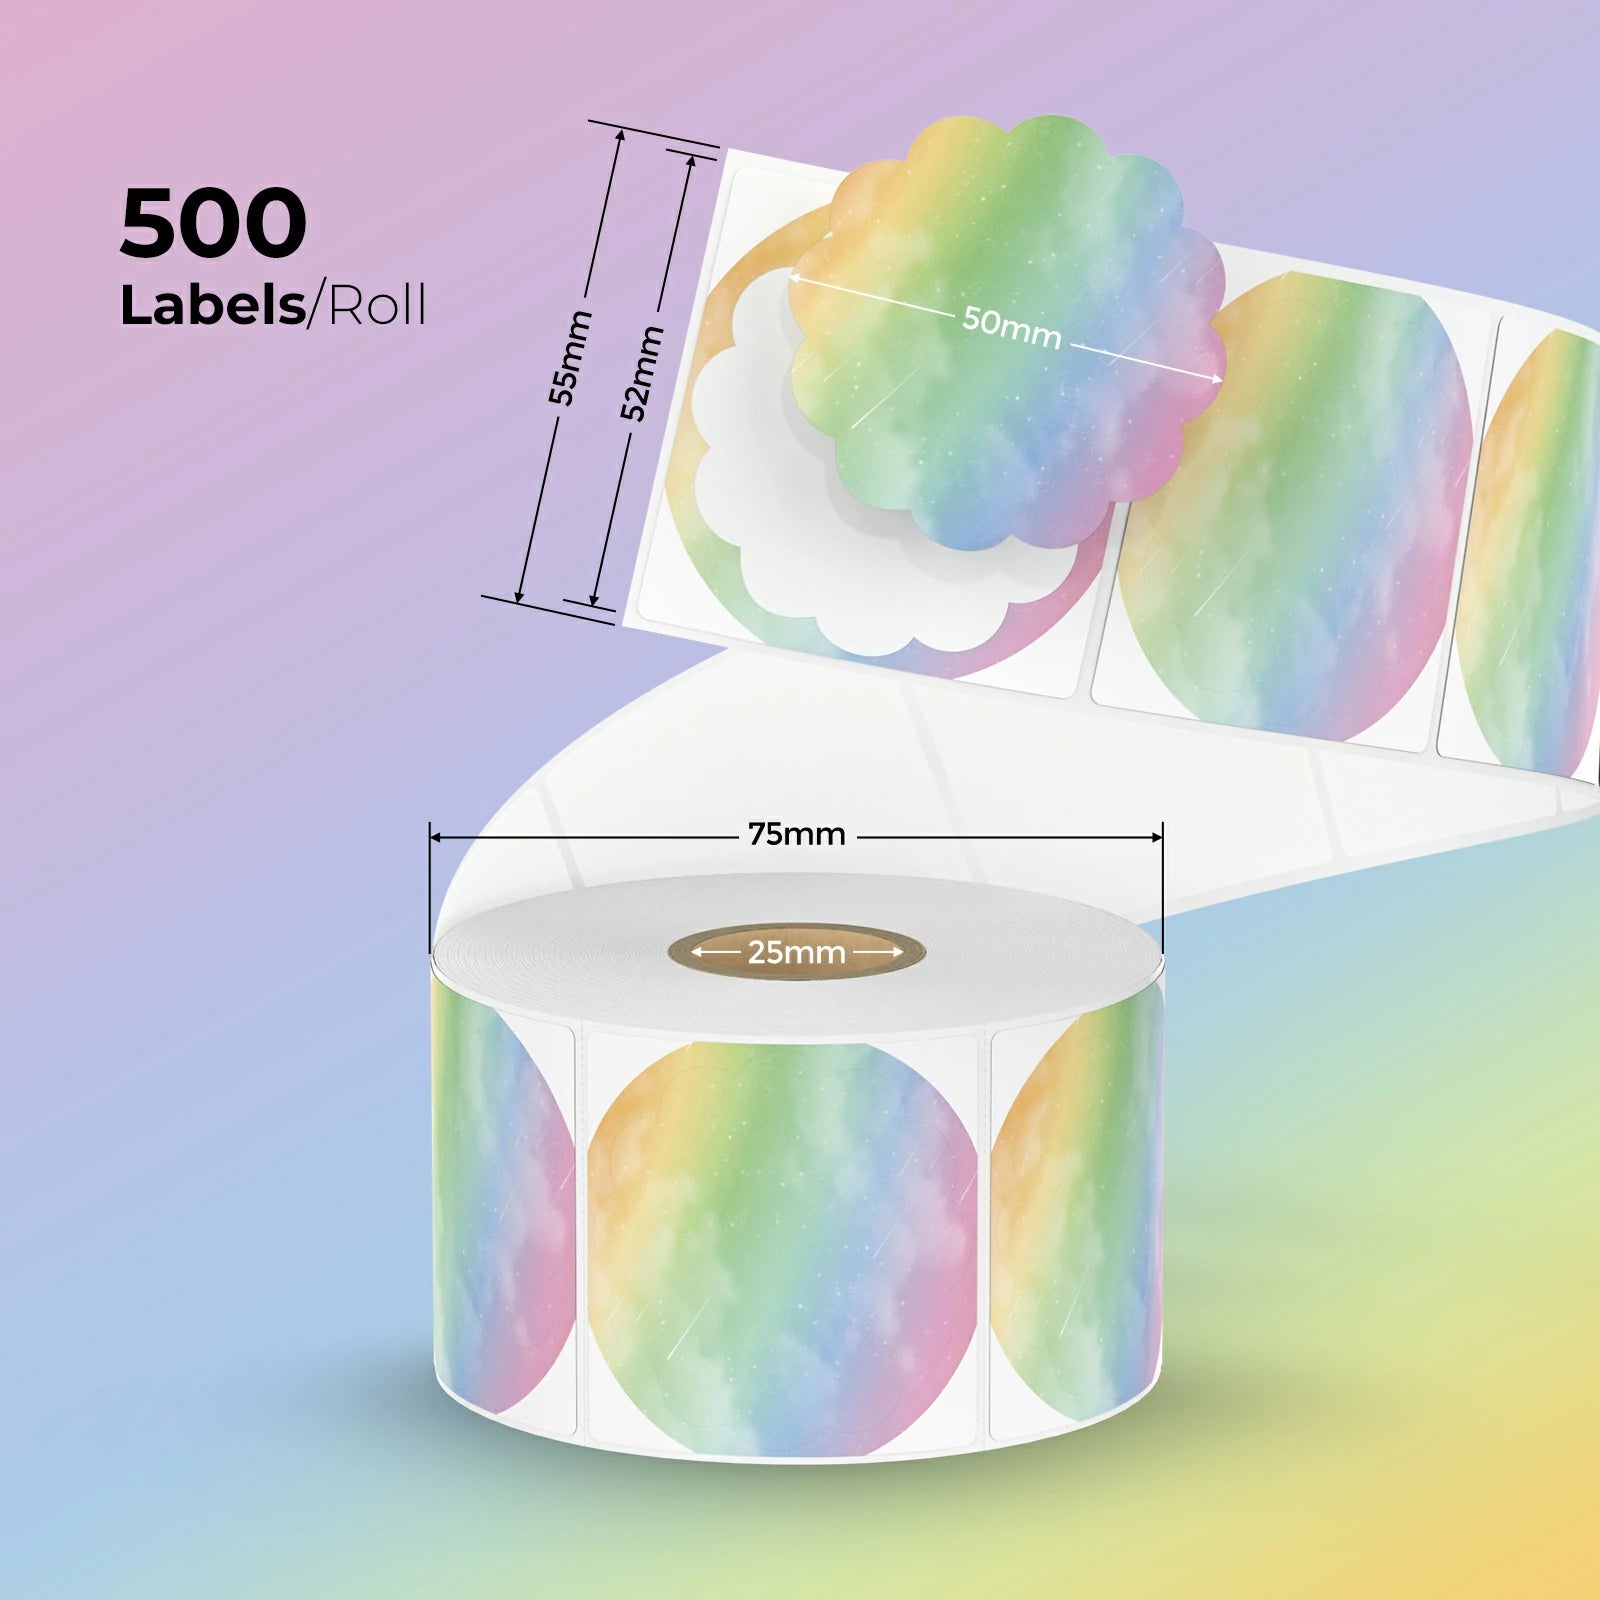 MUNBYN 50mm Watercolor floral labels, 500 sheets per roll.